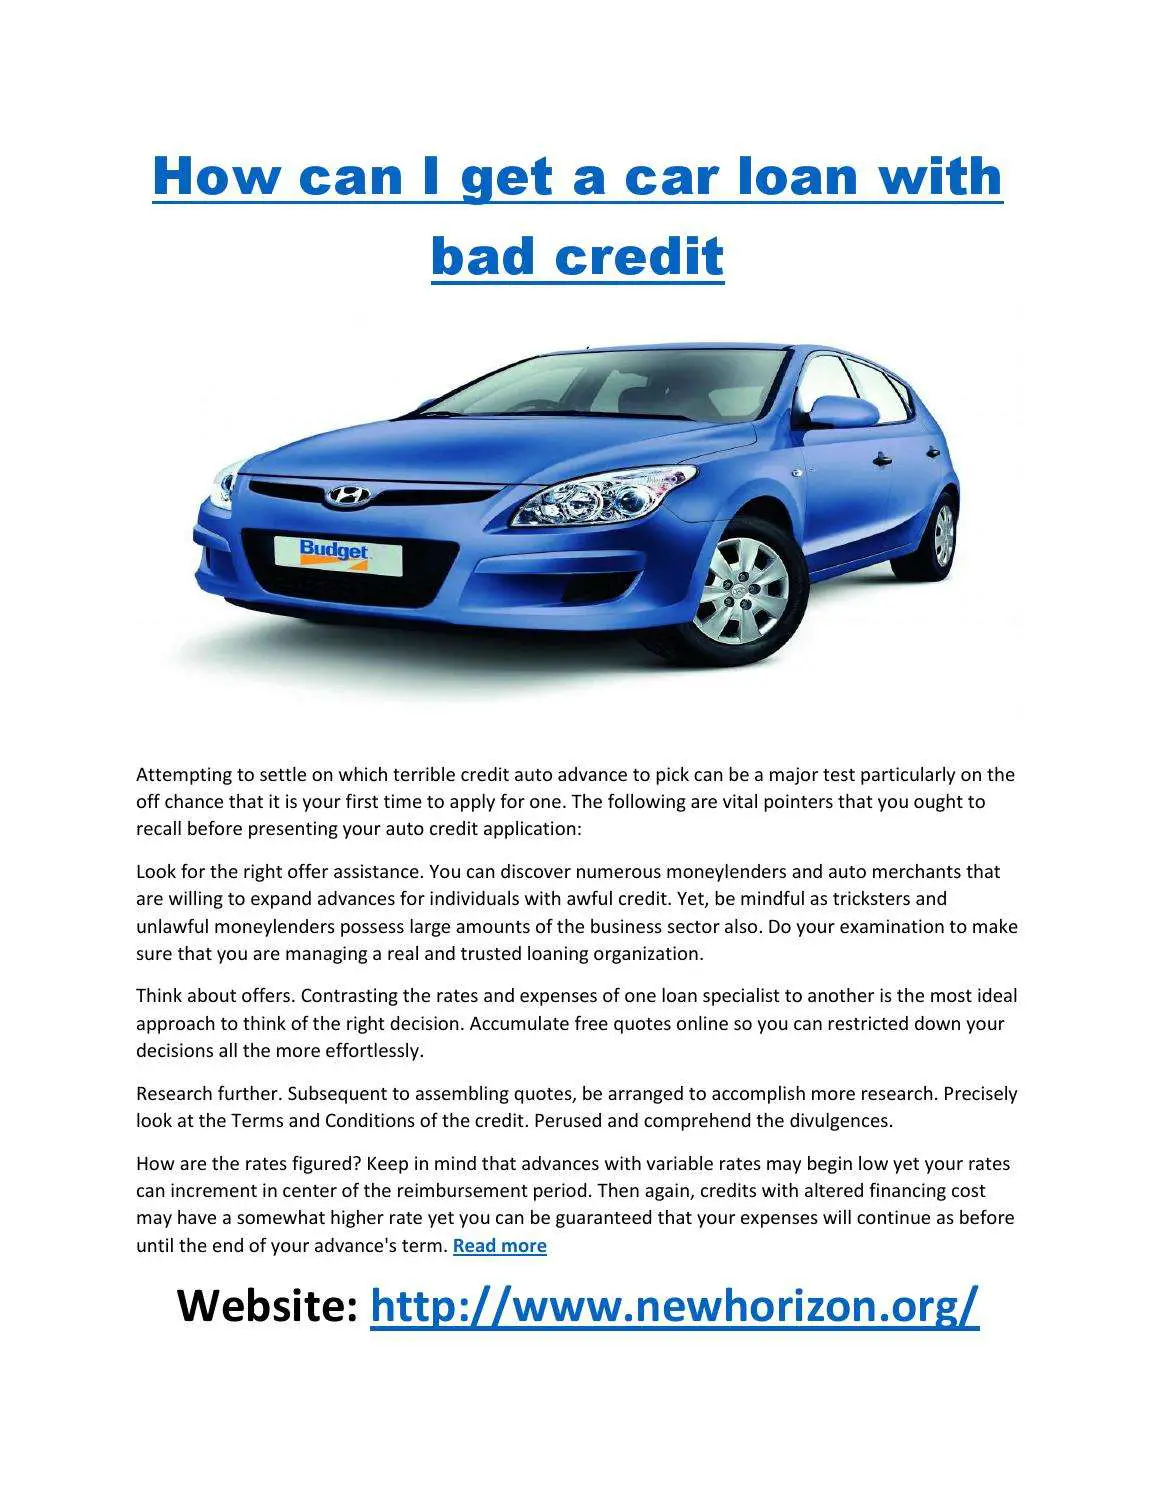 How can i get a car loan with bad credit by Mary S ...